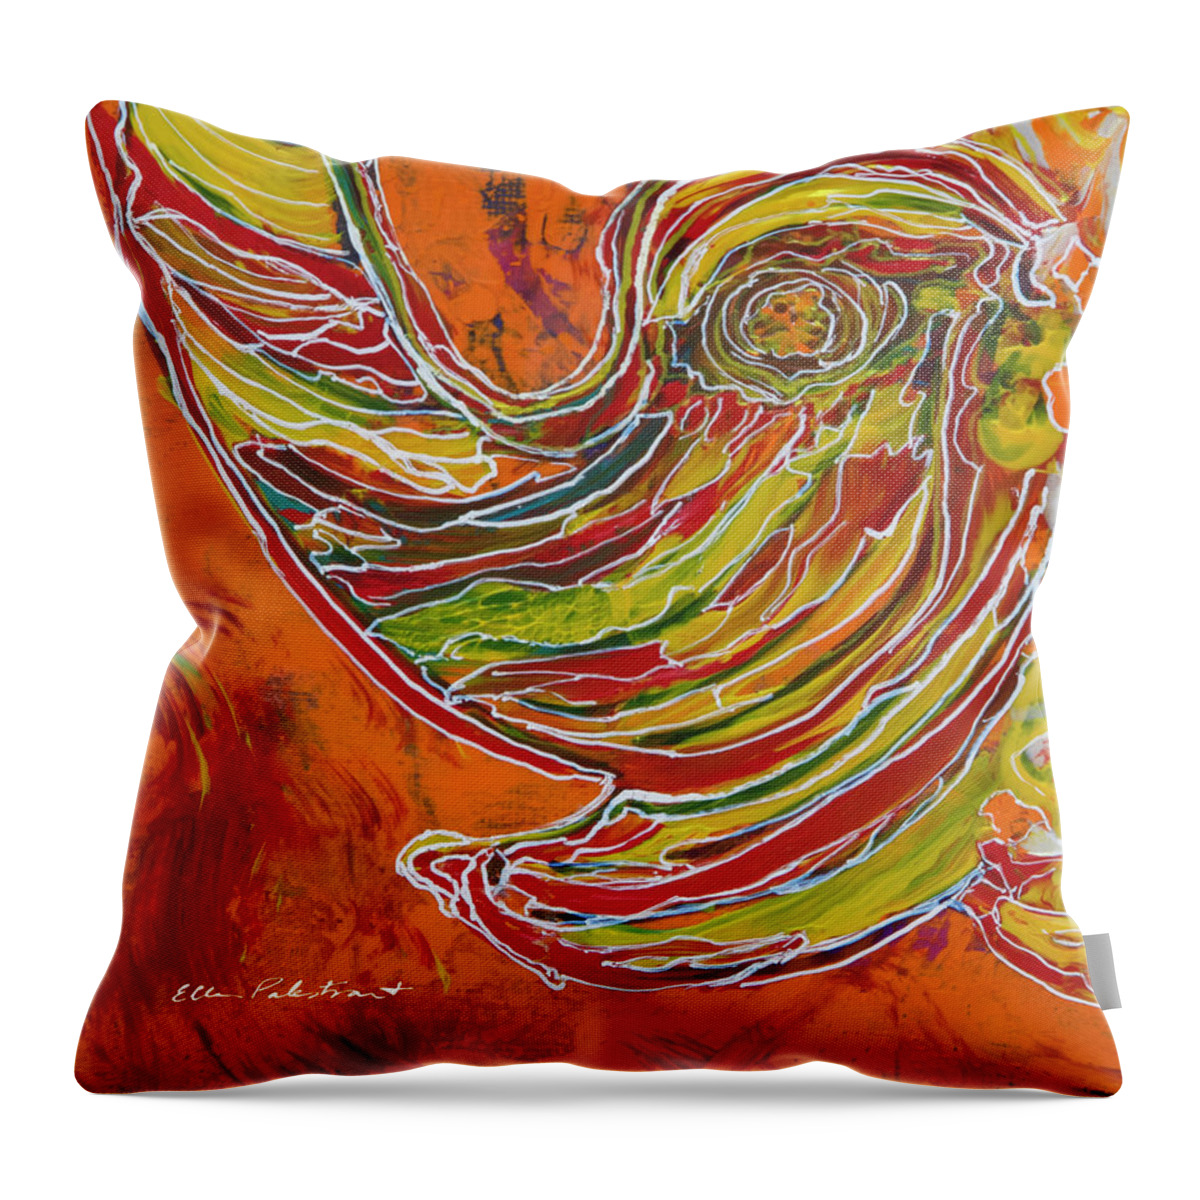 Ellen Palestrant Throw Pillow featuring the painting The Ellipop by Ellen Palestrant